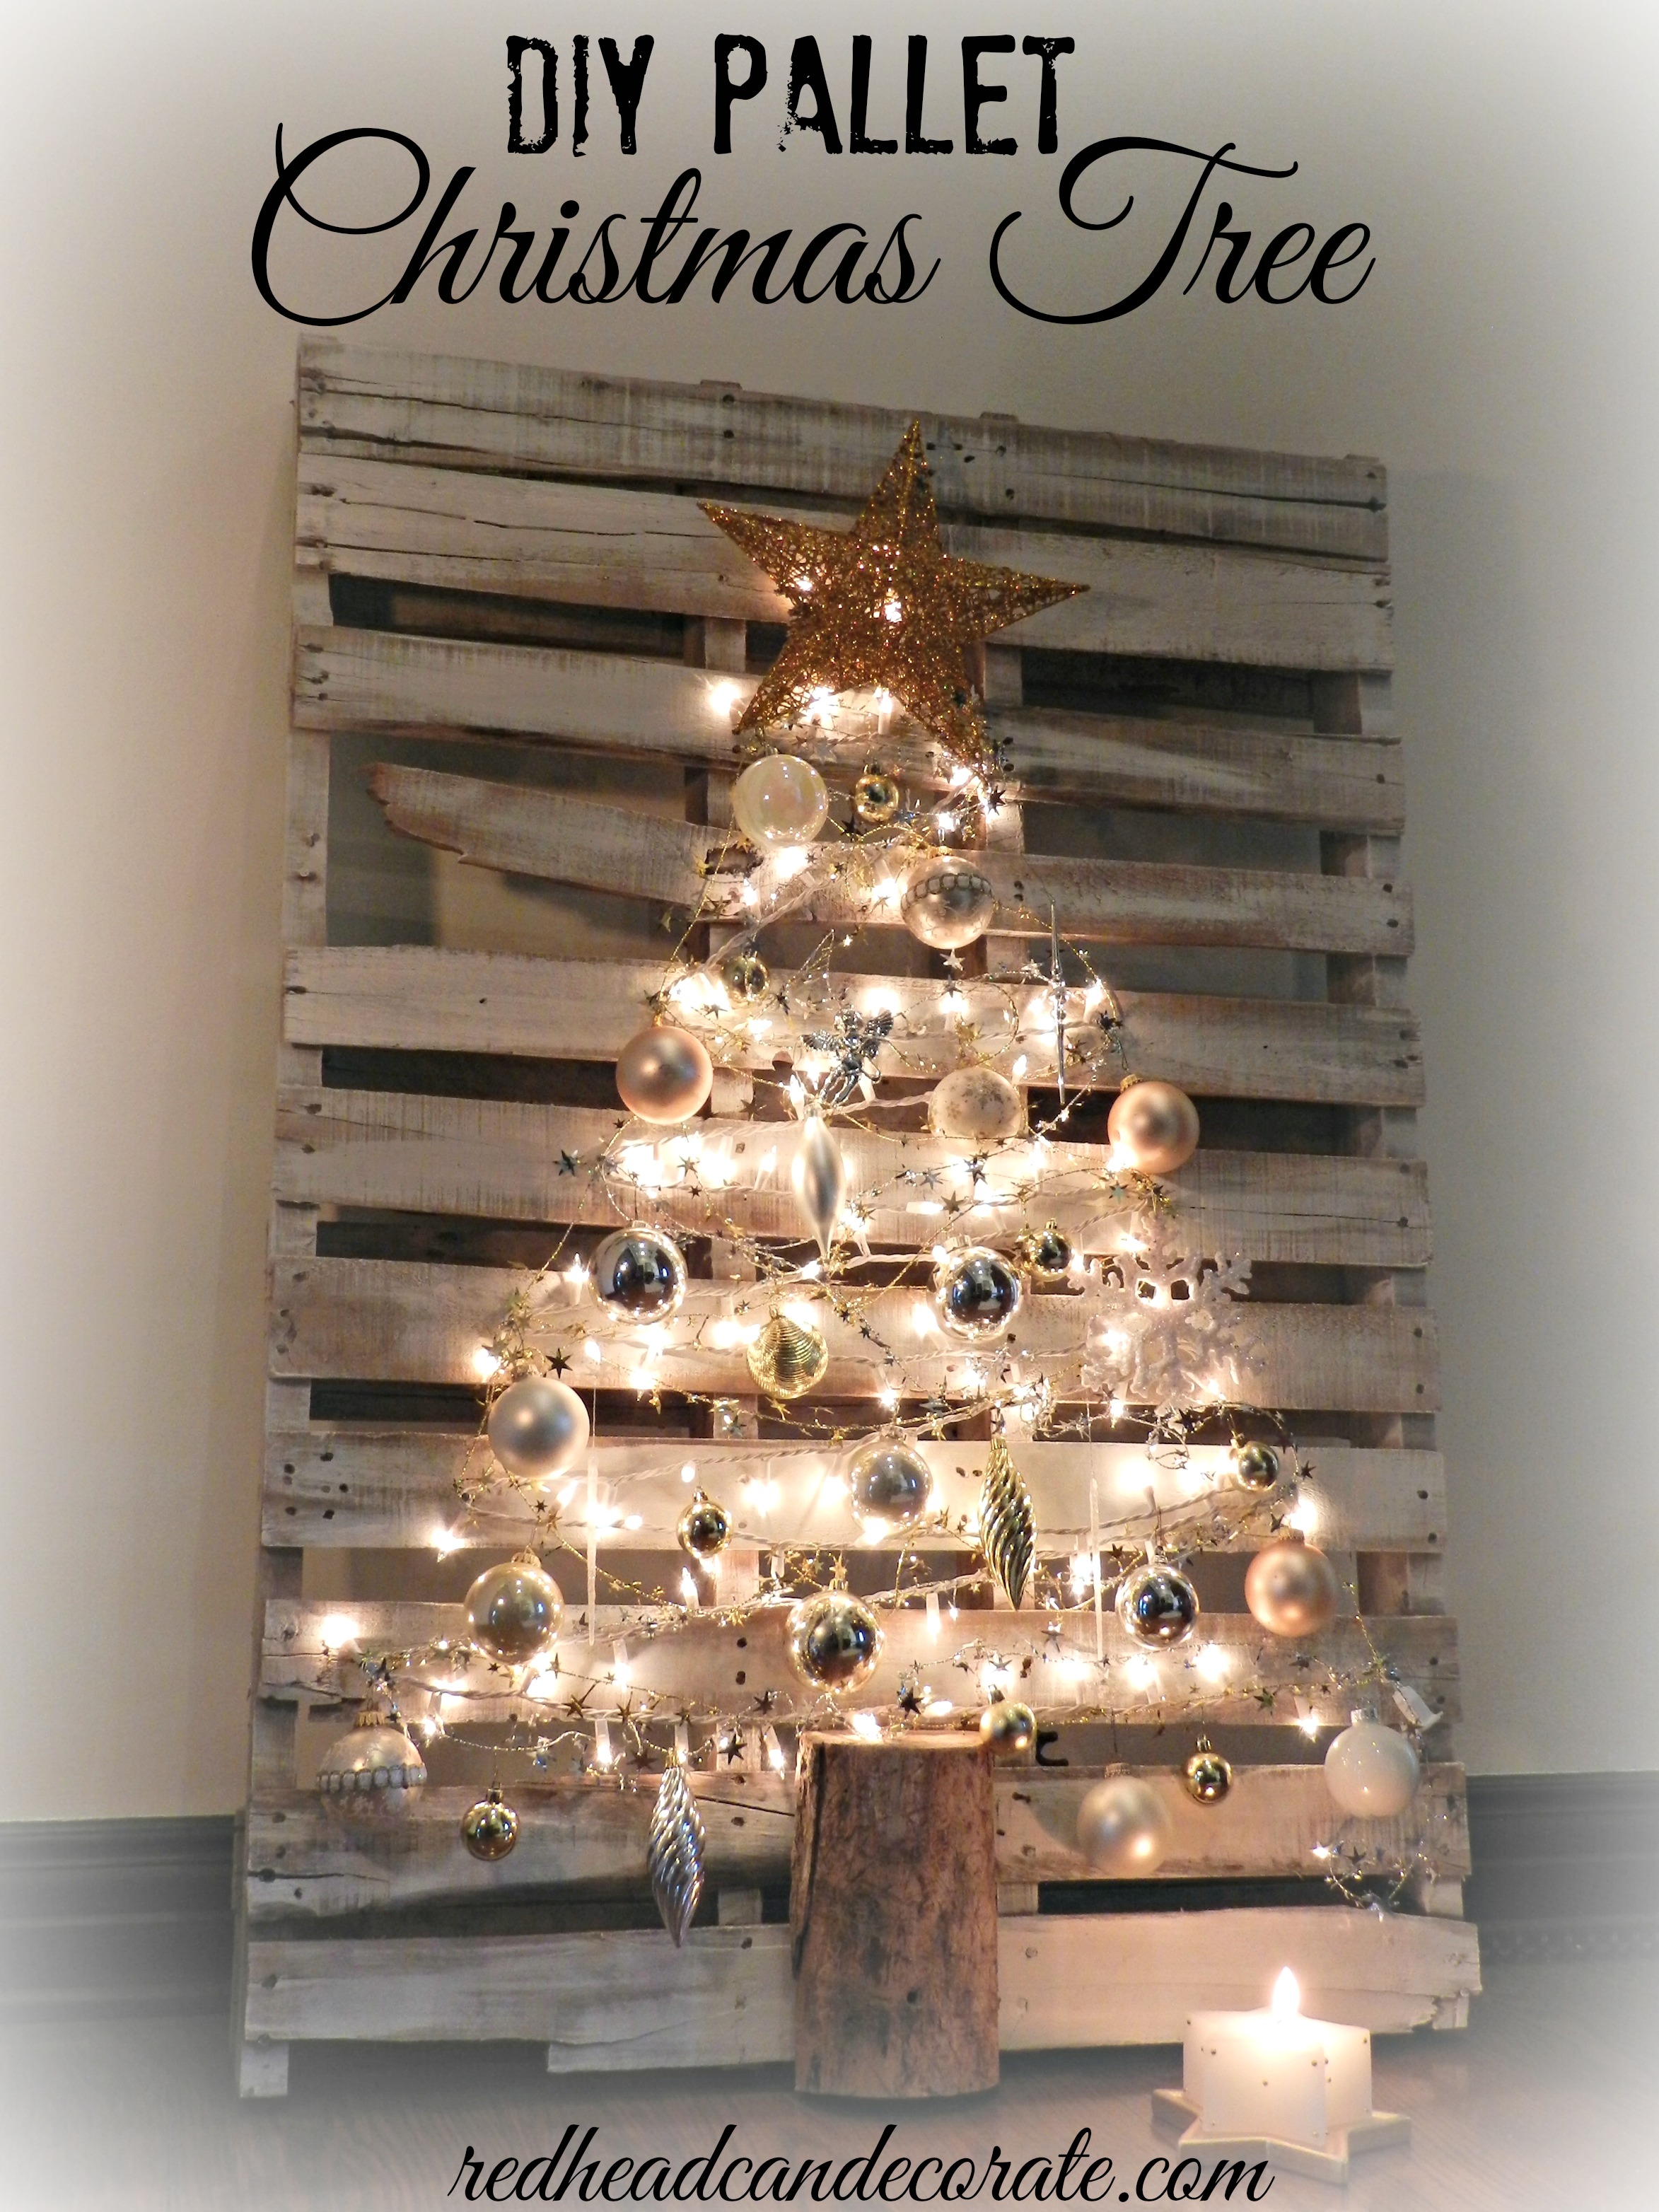 DIY Pallet Christmas Tree by REdhead Can Decorate